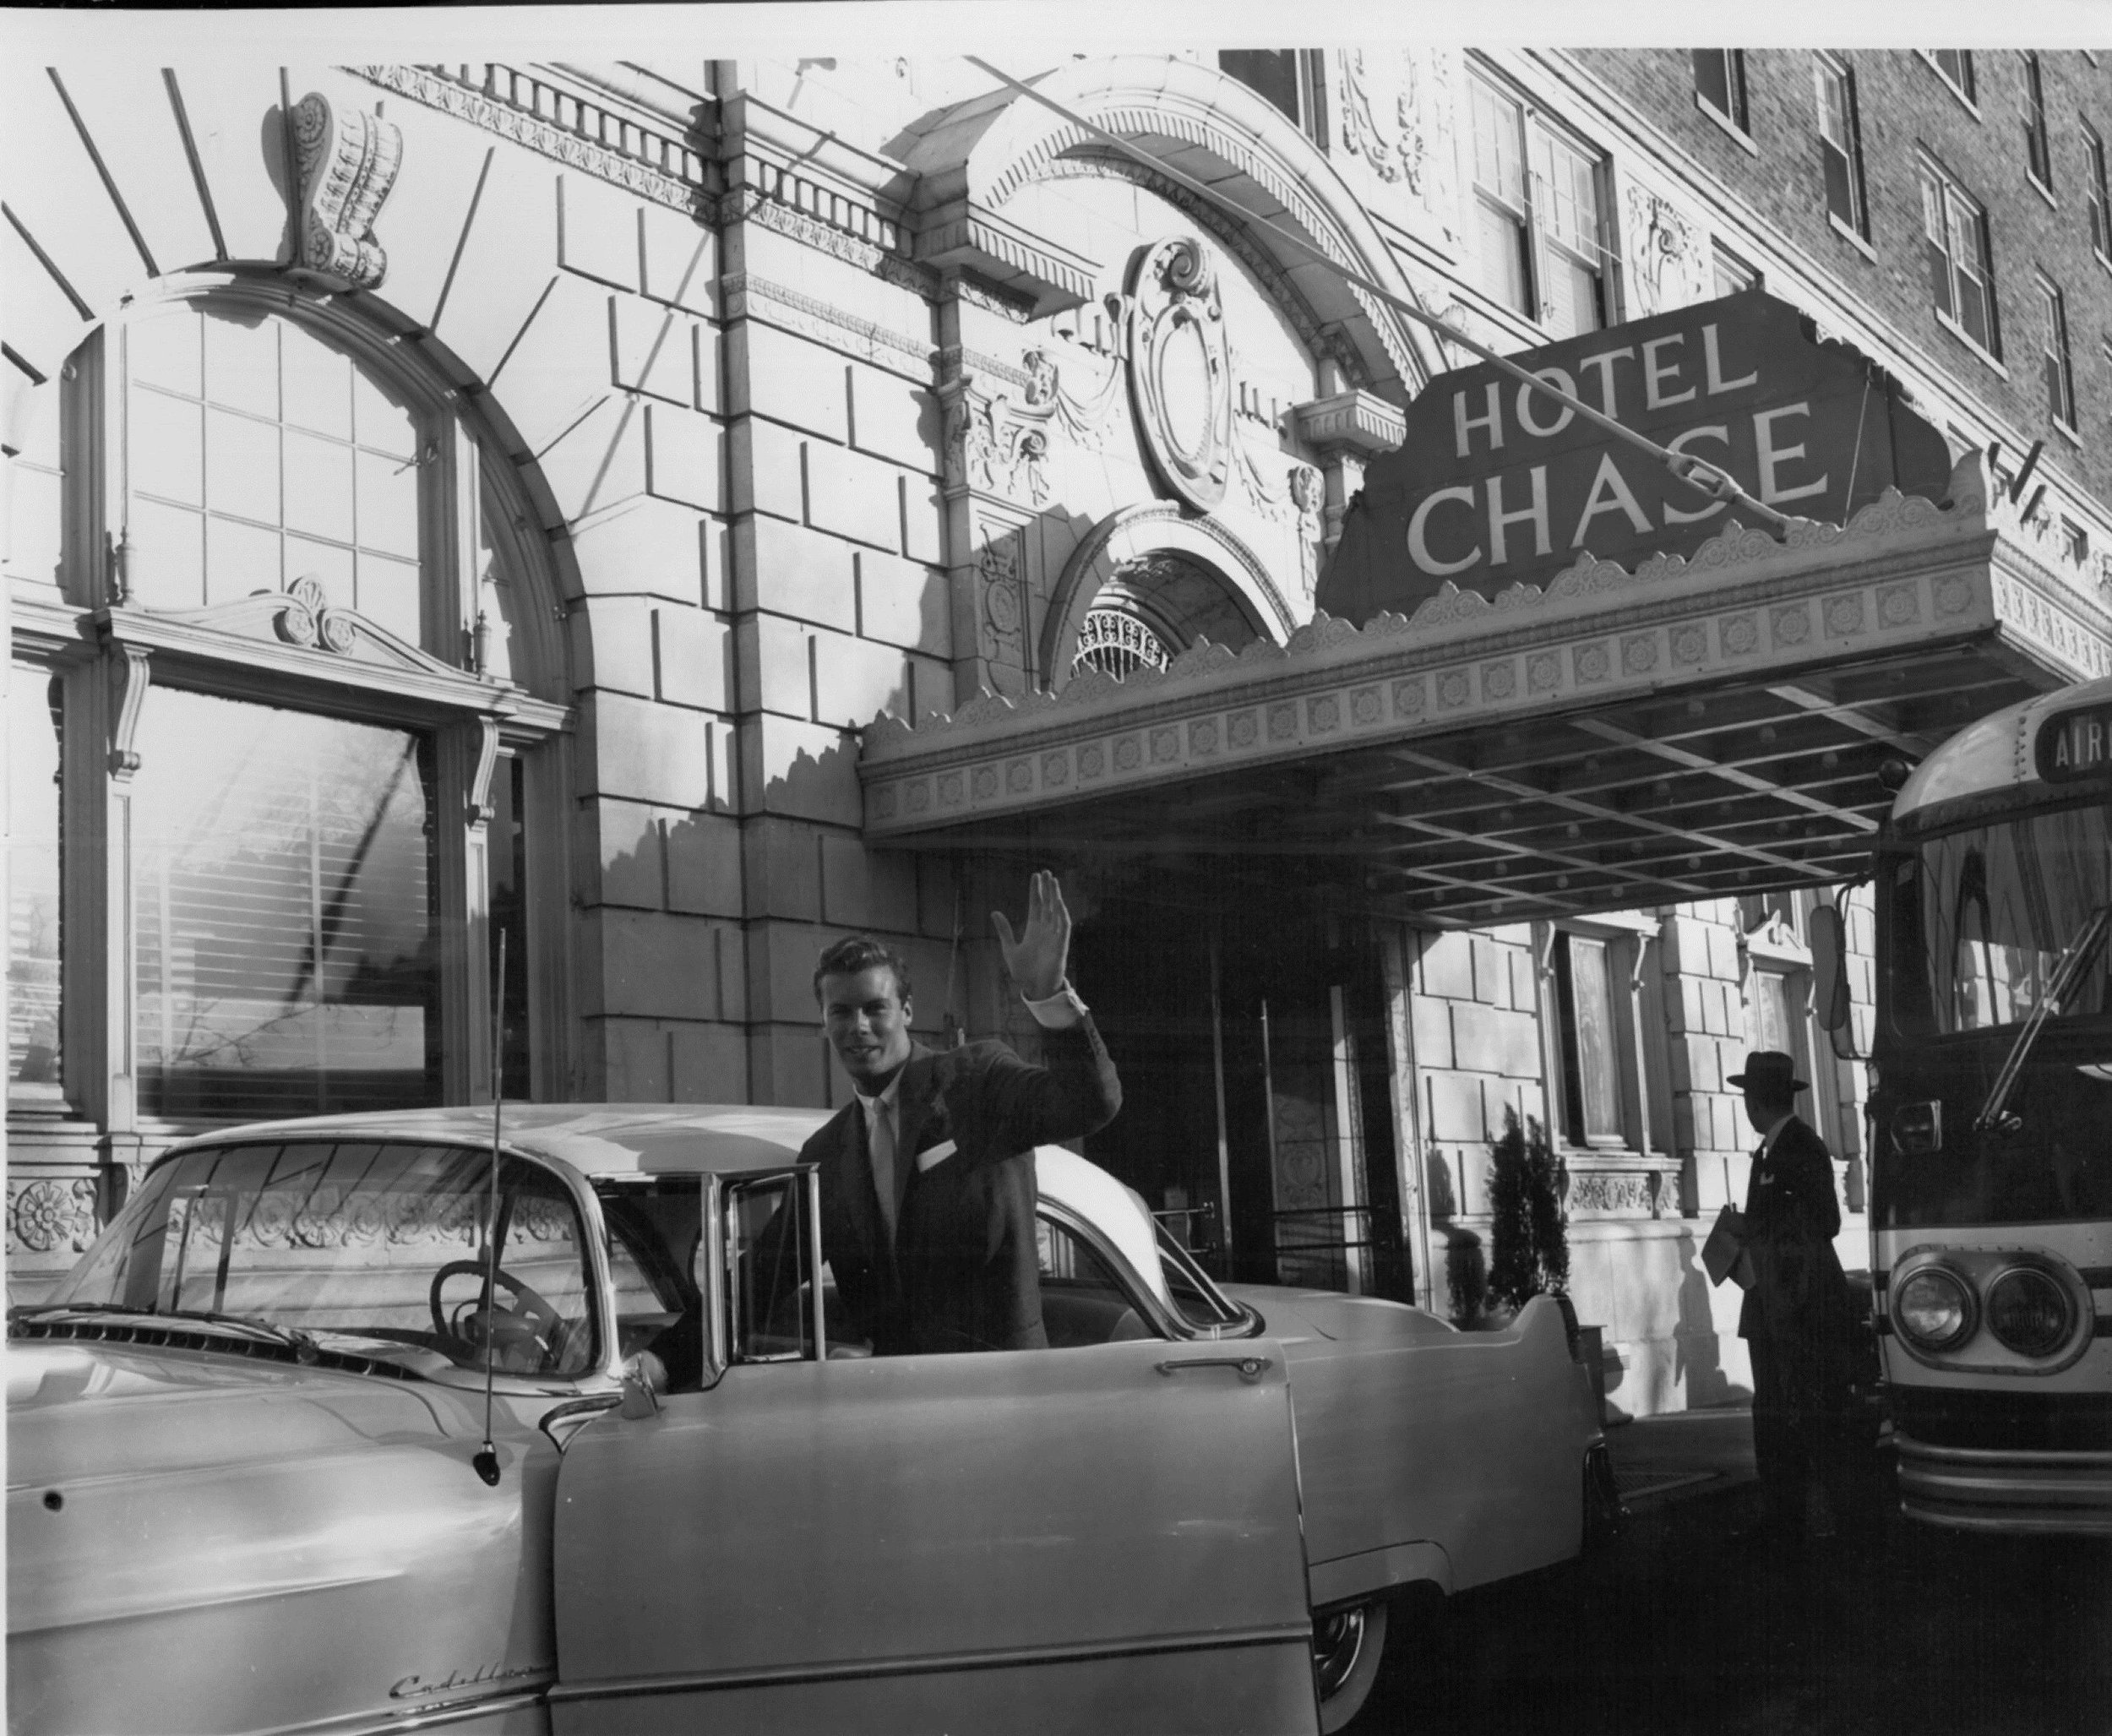  One of Bob’s tours in 1954 took him to St. Louis, Mo., where he stayed at the Chase Hotel in the Central West End section of the city, among other cities. On the tour he purchased a Cadillac (probably in Detroit) which he then drove to many of the t